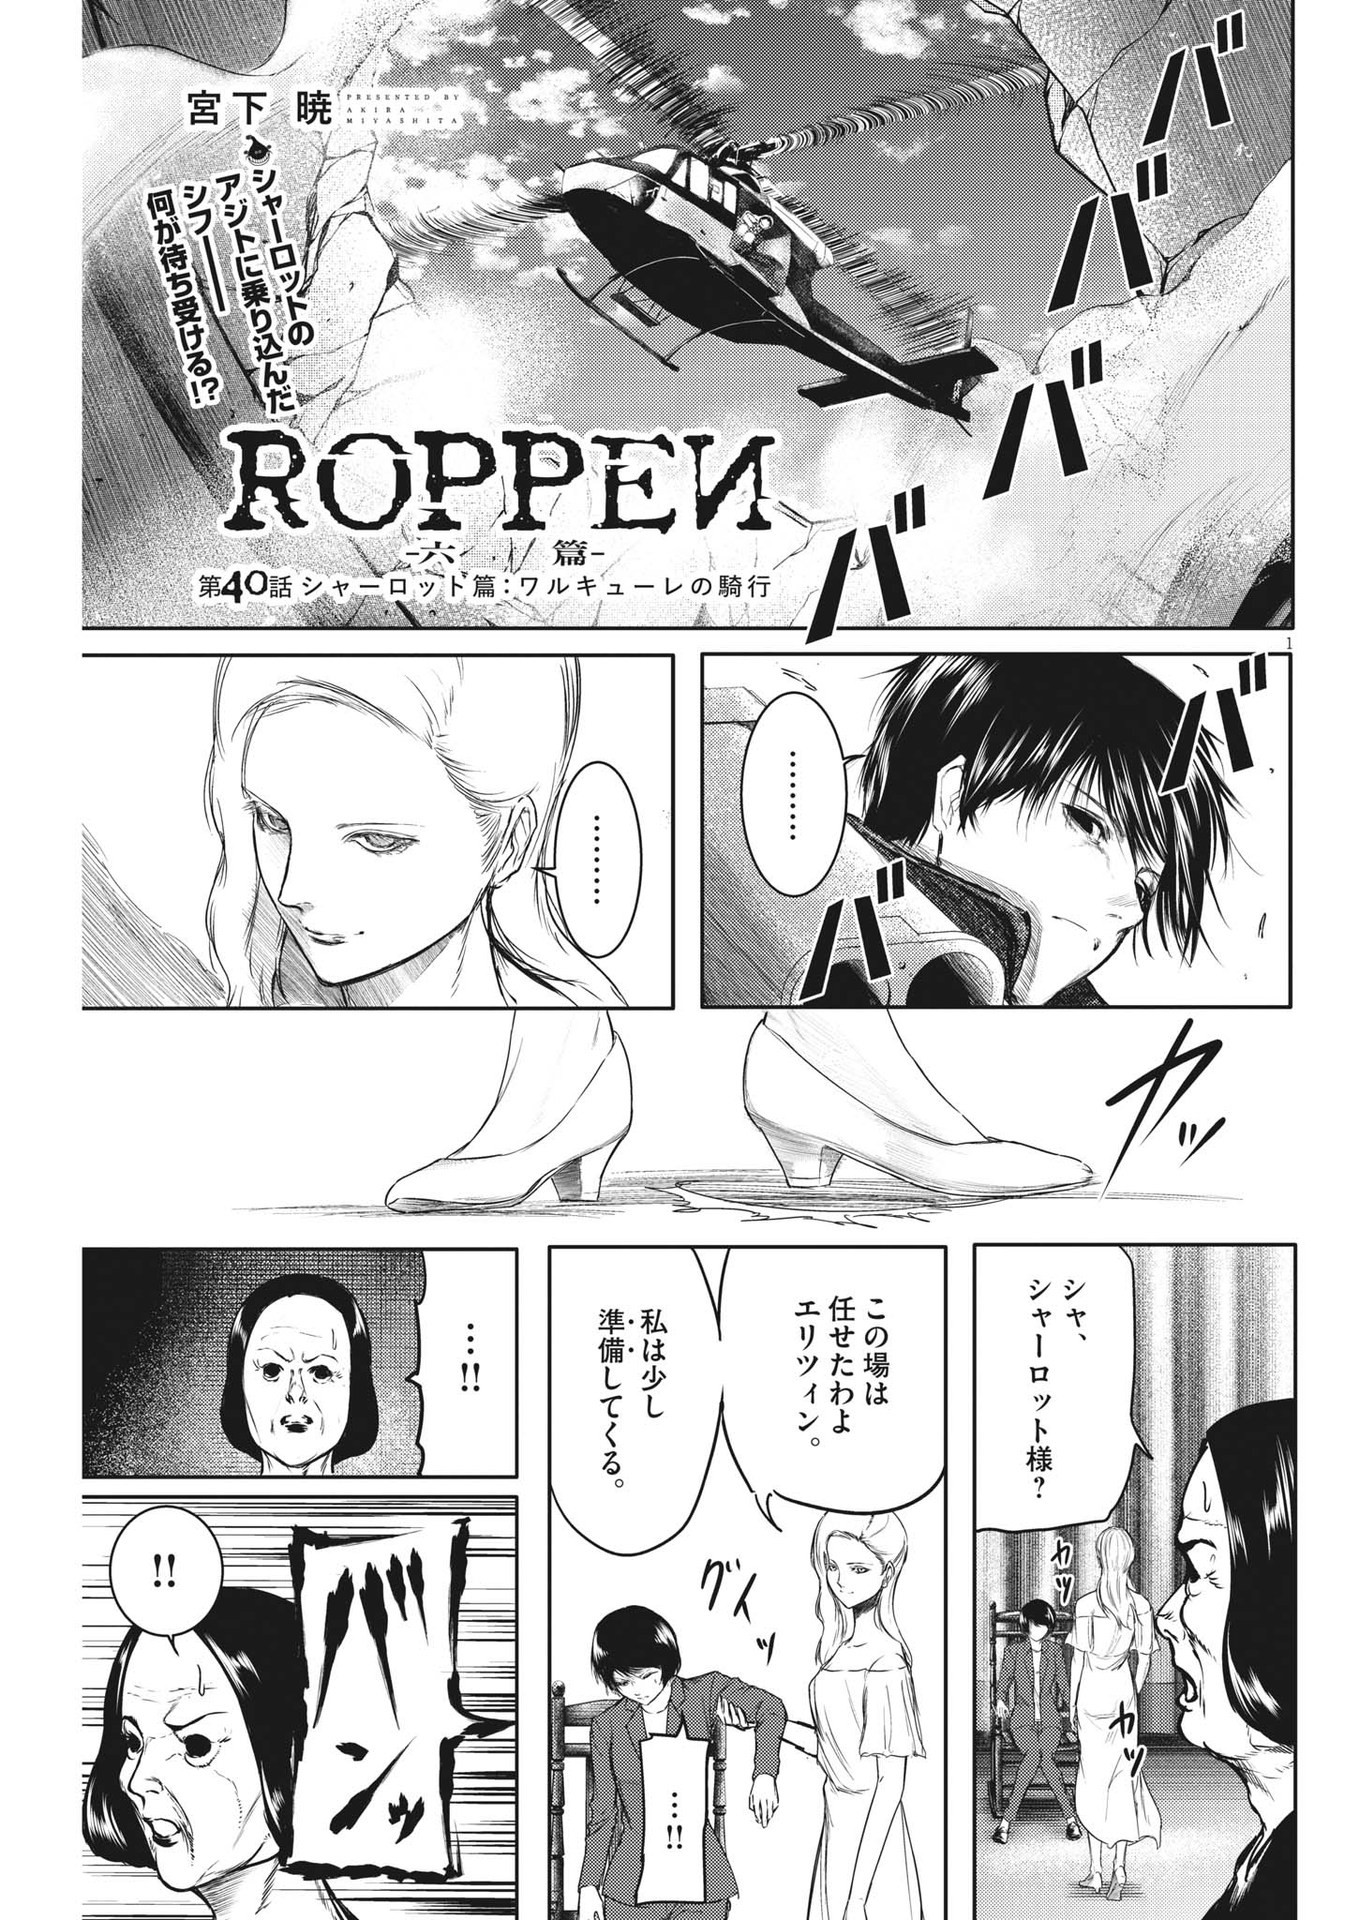 Roppen - Chapter 40 - Page 1